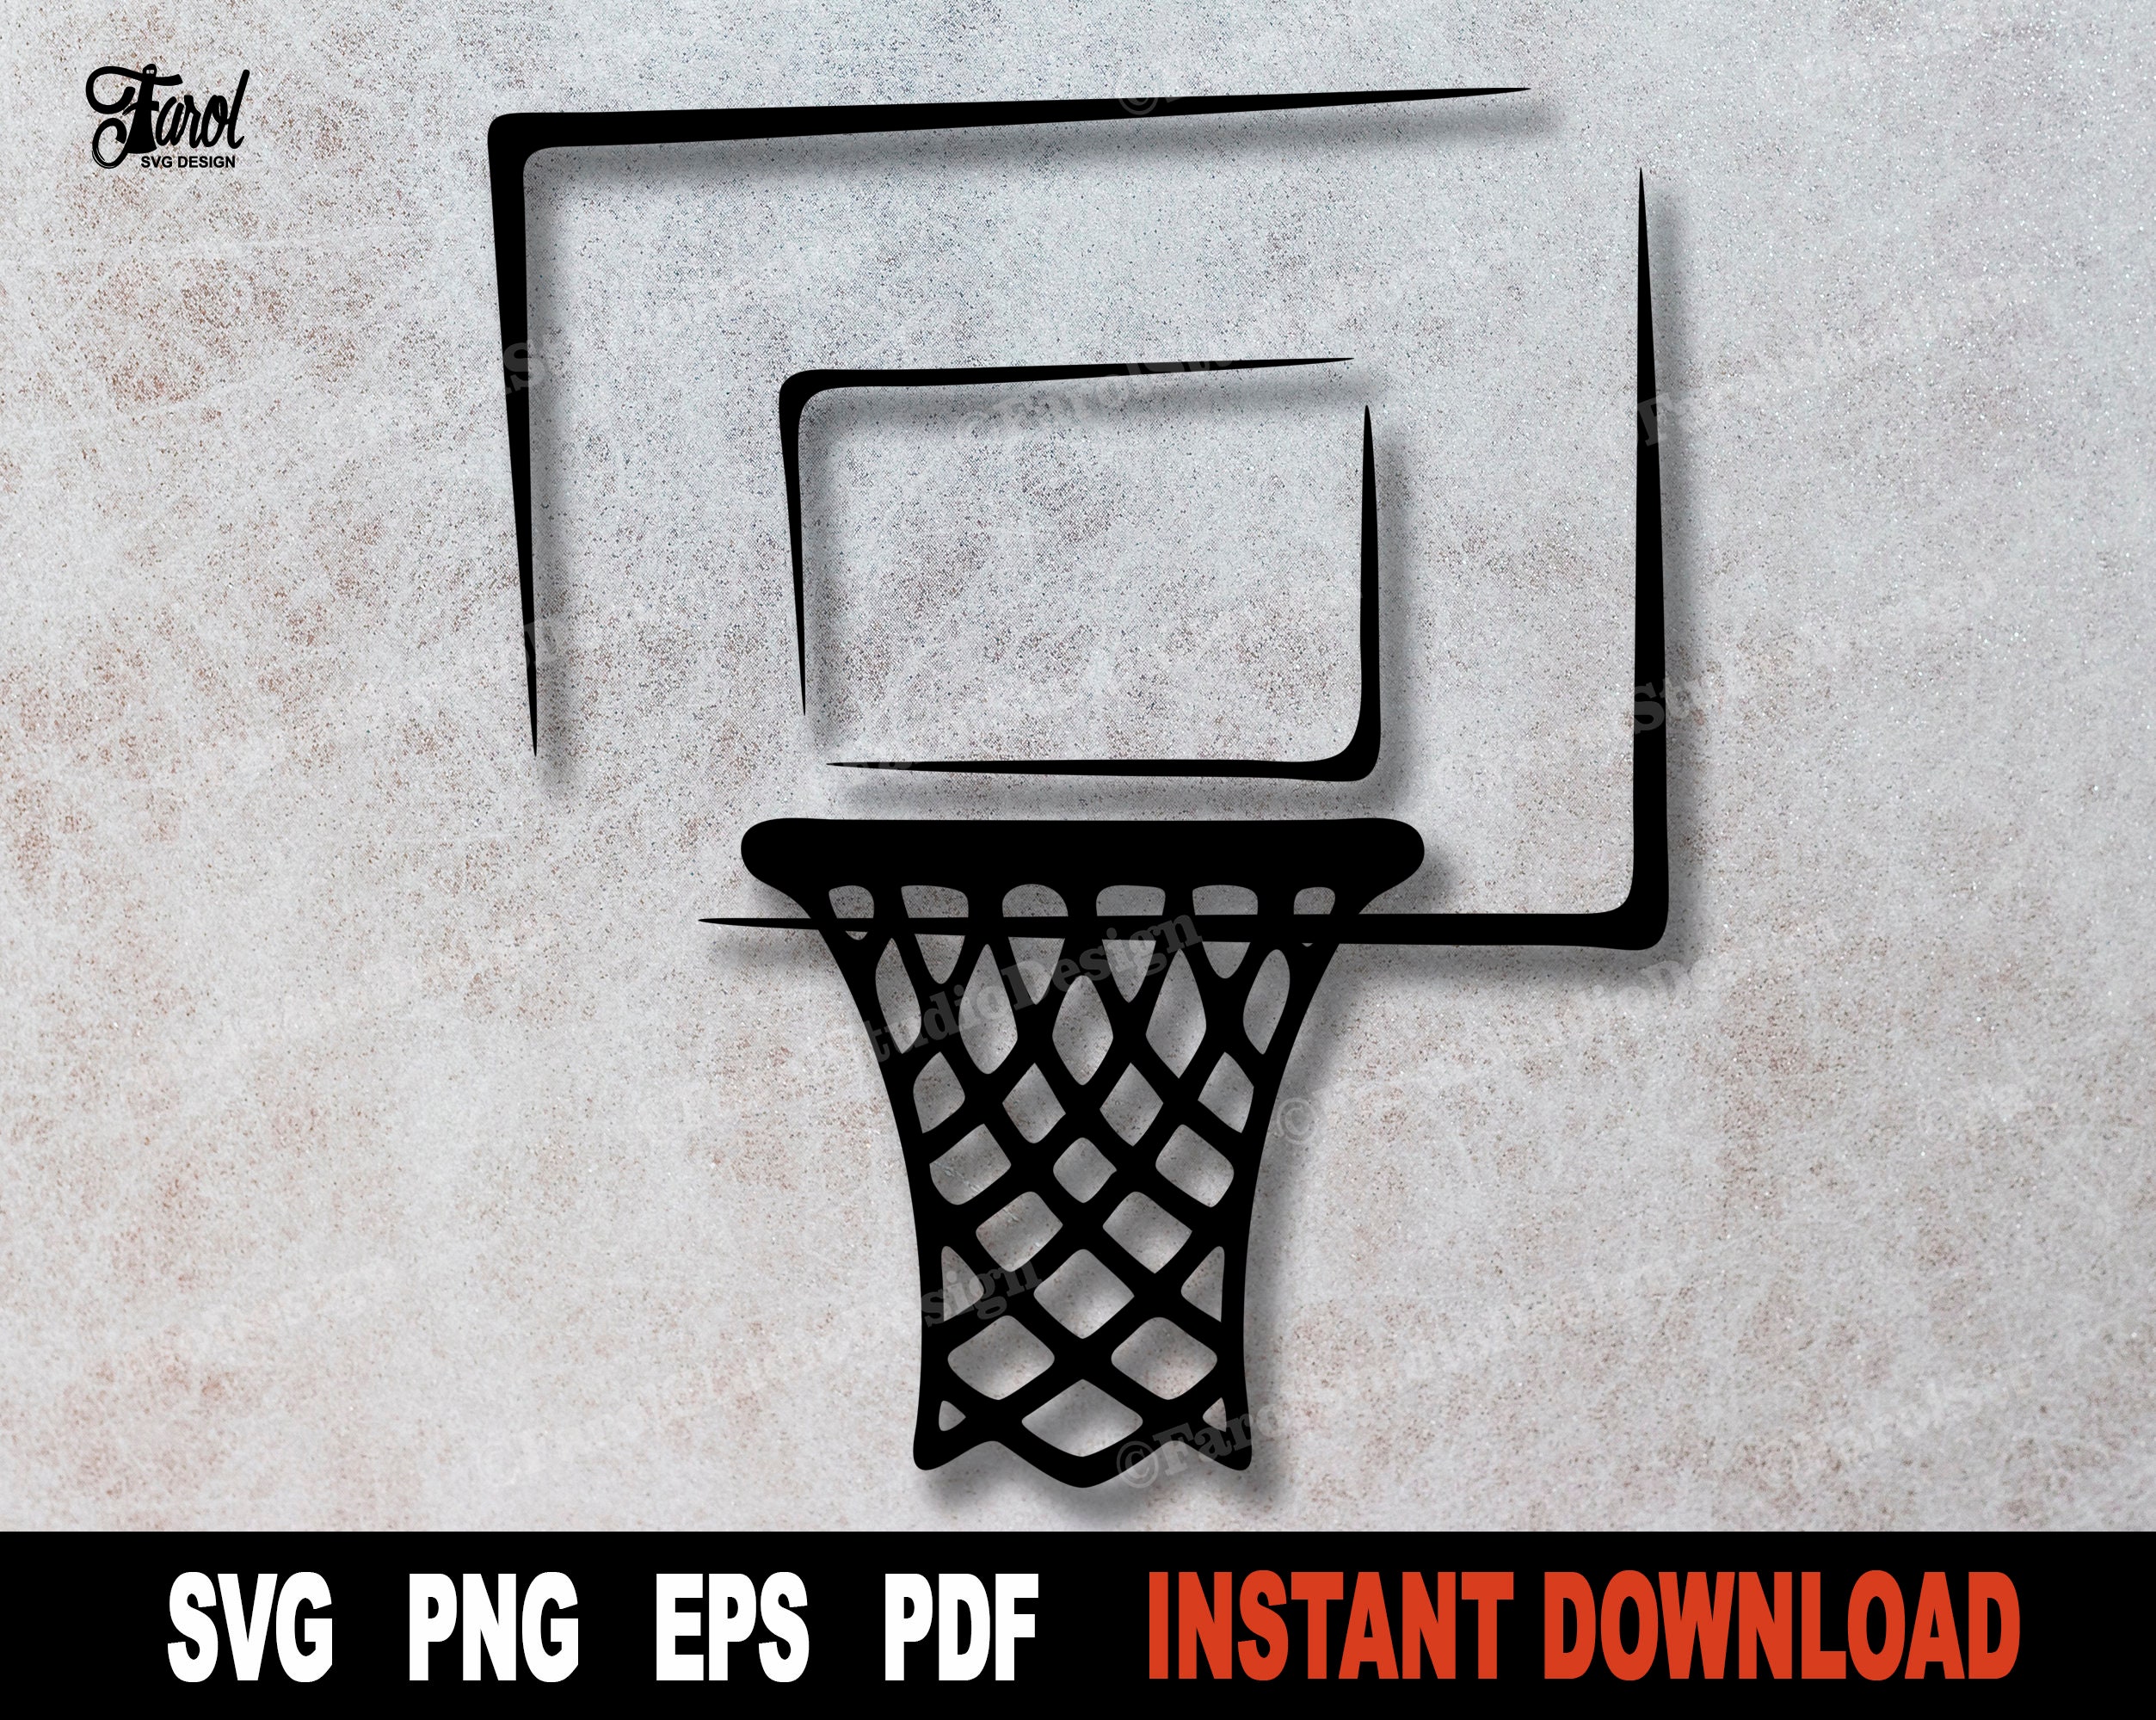 Basketball Hoop Svg, Basketball Backboard Svg, Vector Cut file for Cricut,  Silhouette, Pdf Png Eps Dxf, Decal, Sticker, Vinyl, Pin